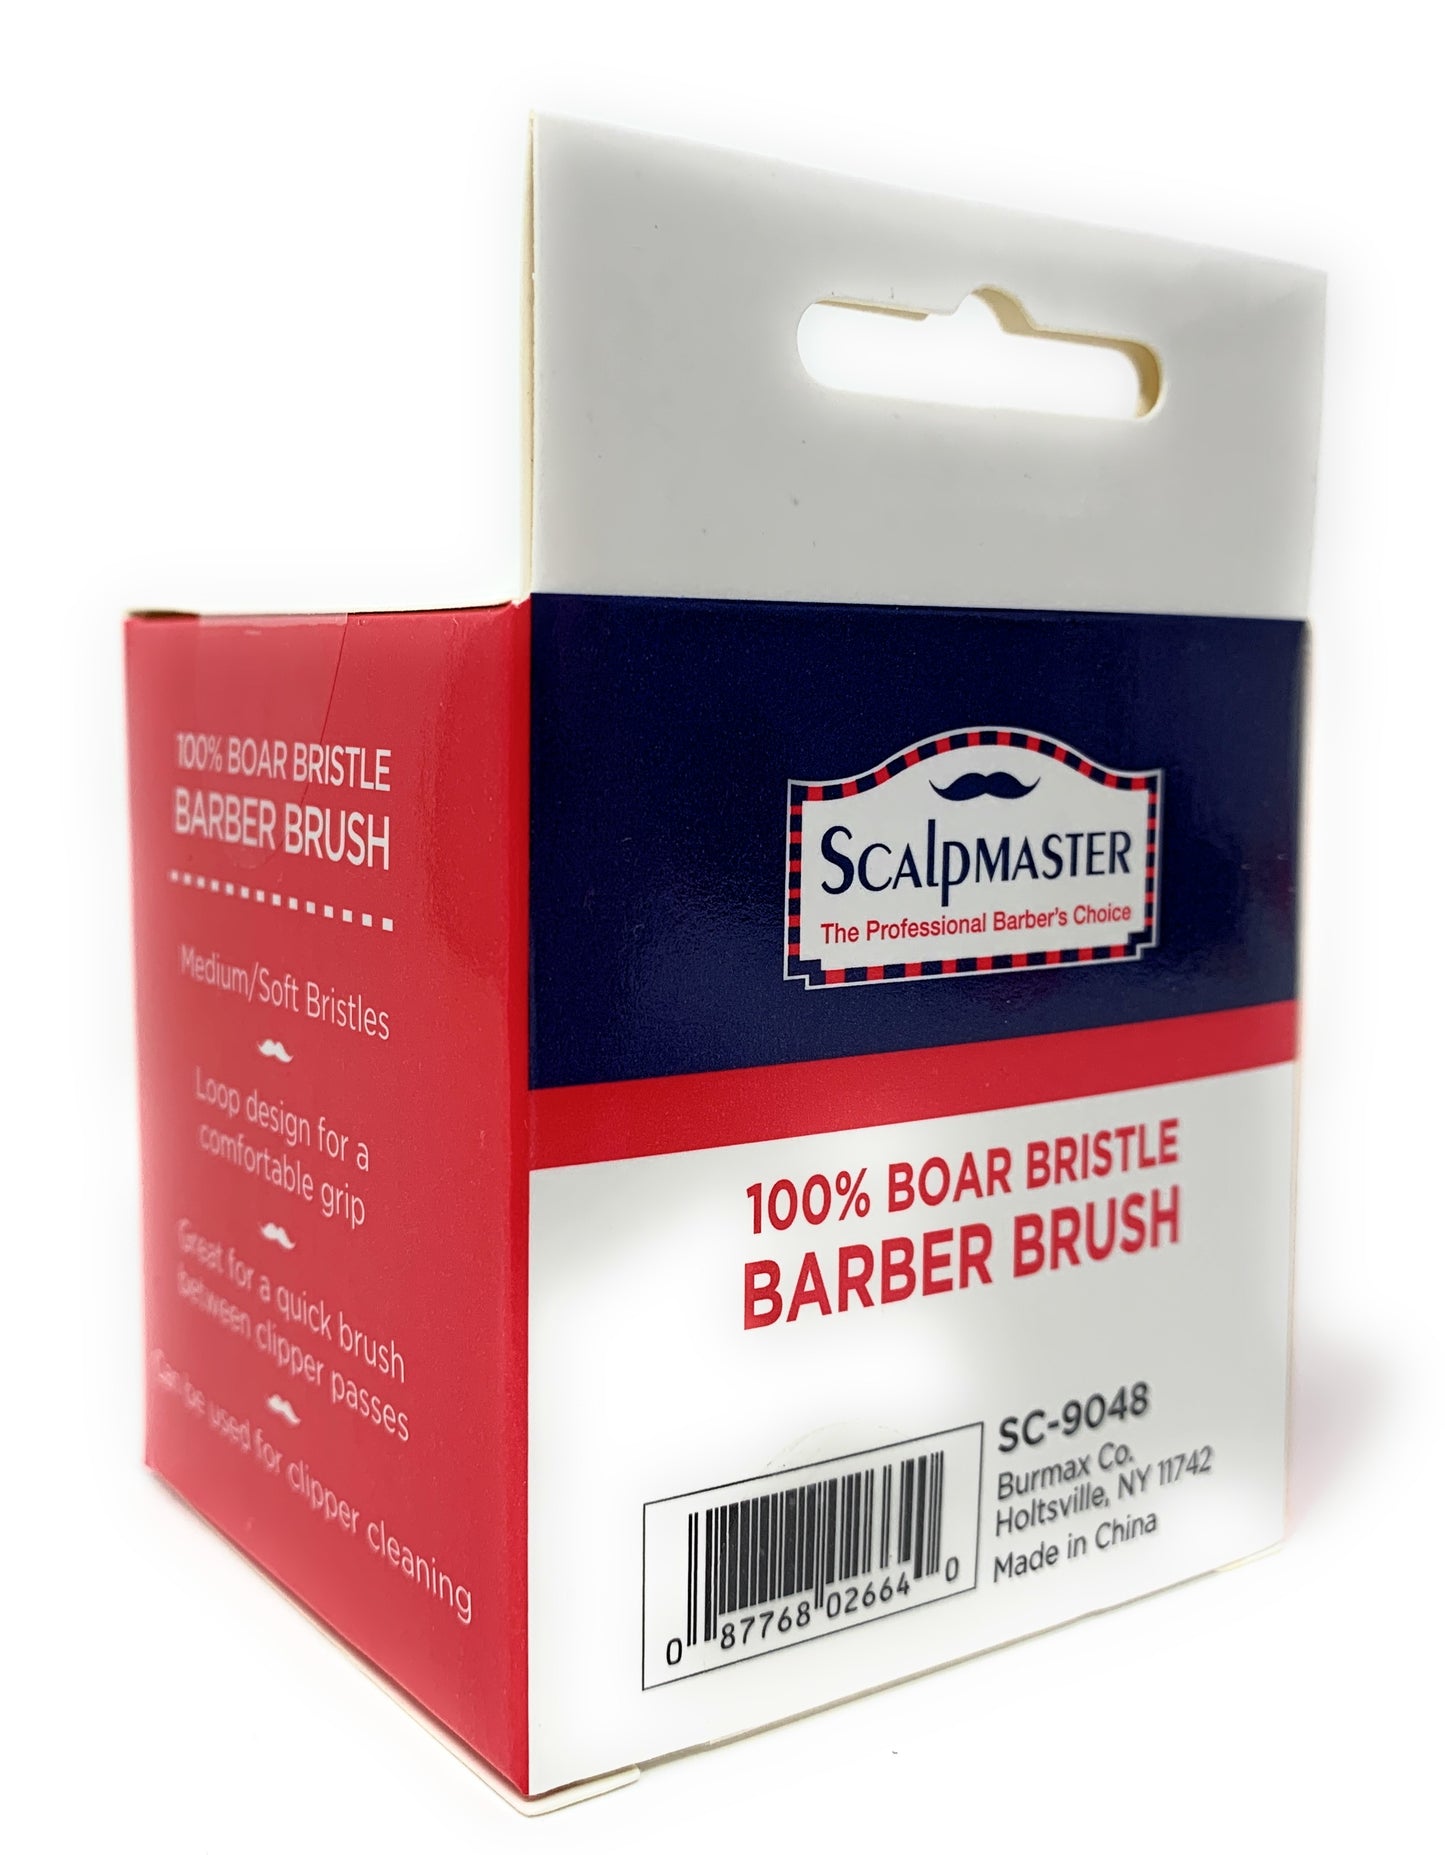 Scalpmaster Barber Brush 100% Boar Bristle Loop Handle Cleans Blades and Combs 1 Pc.